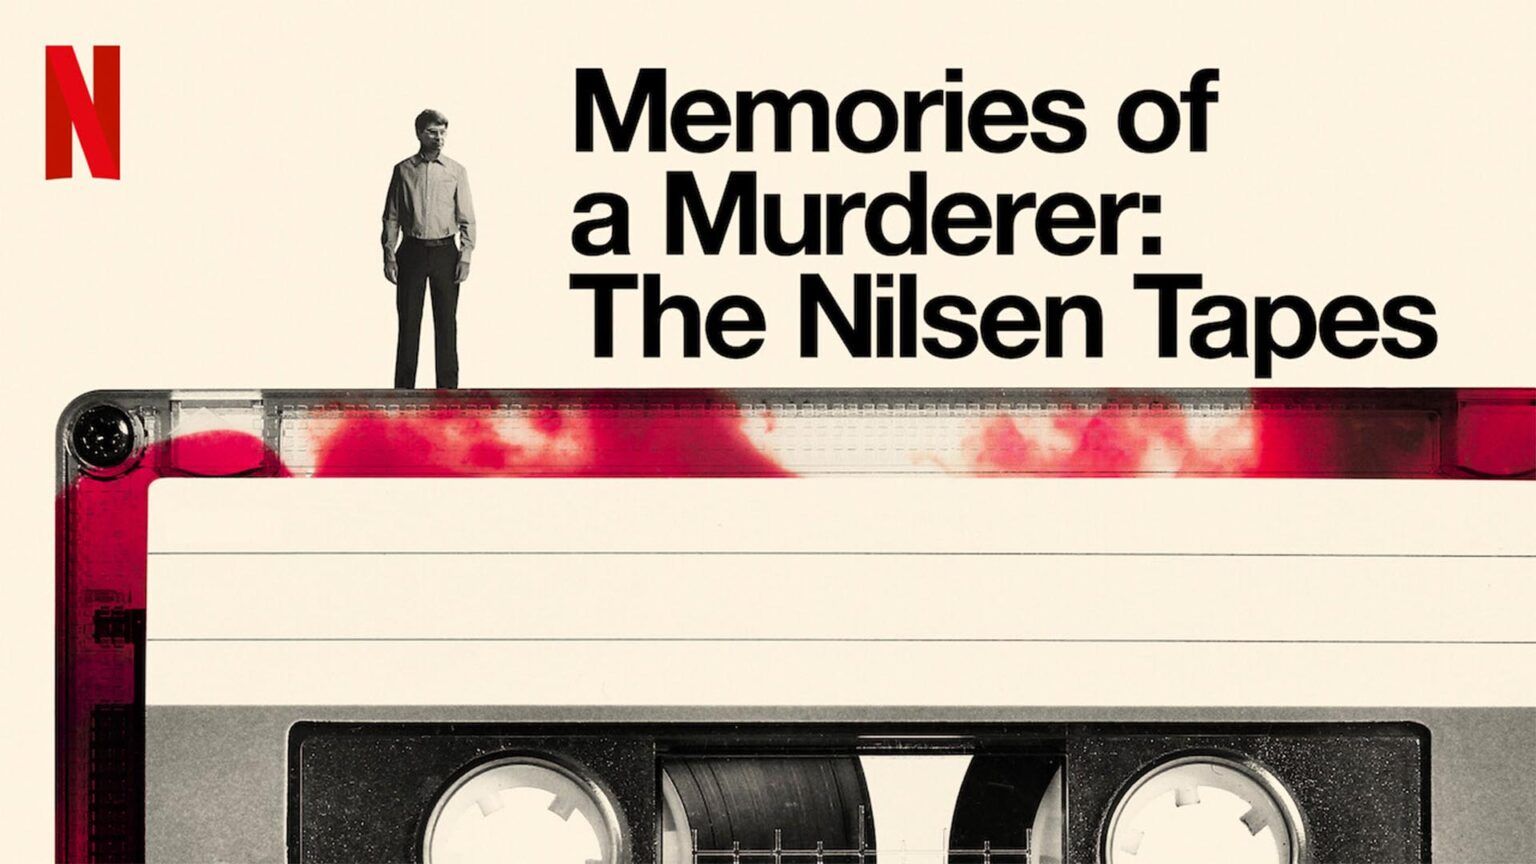 The Nilsen Tapes